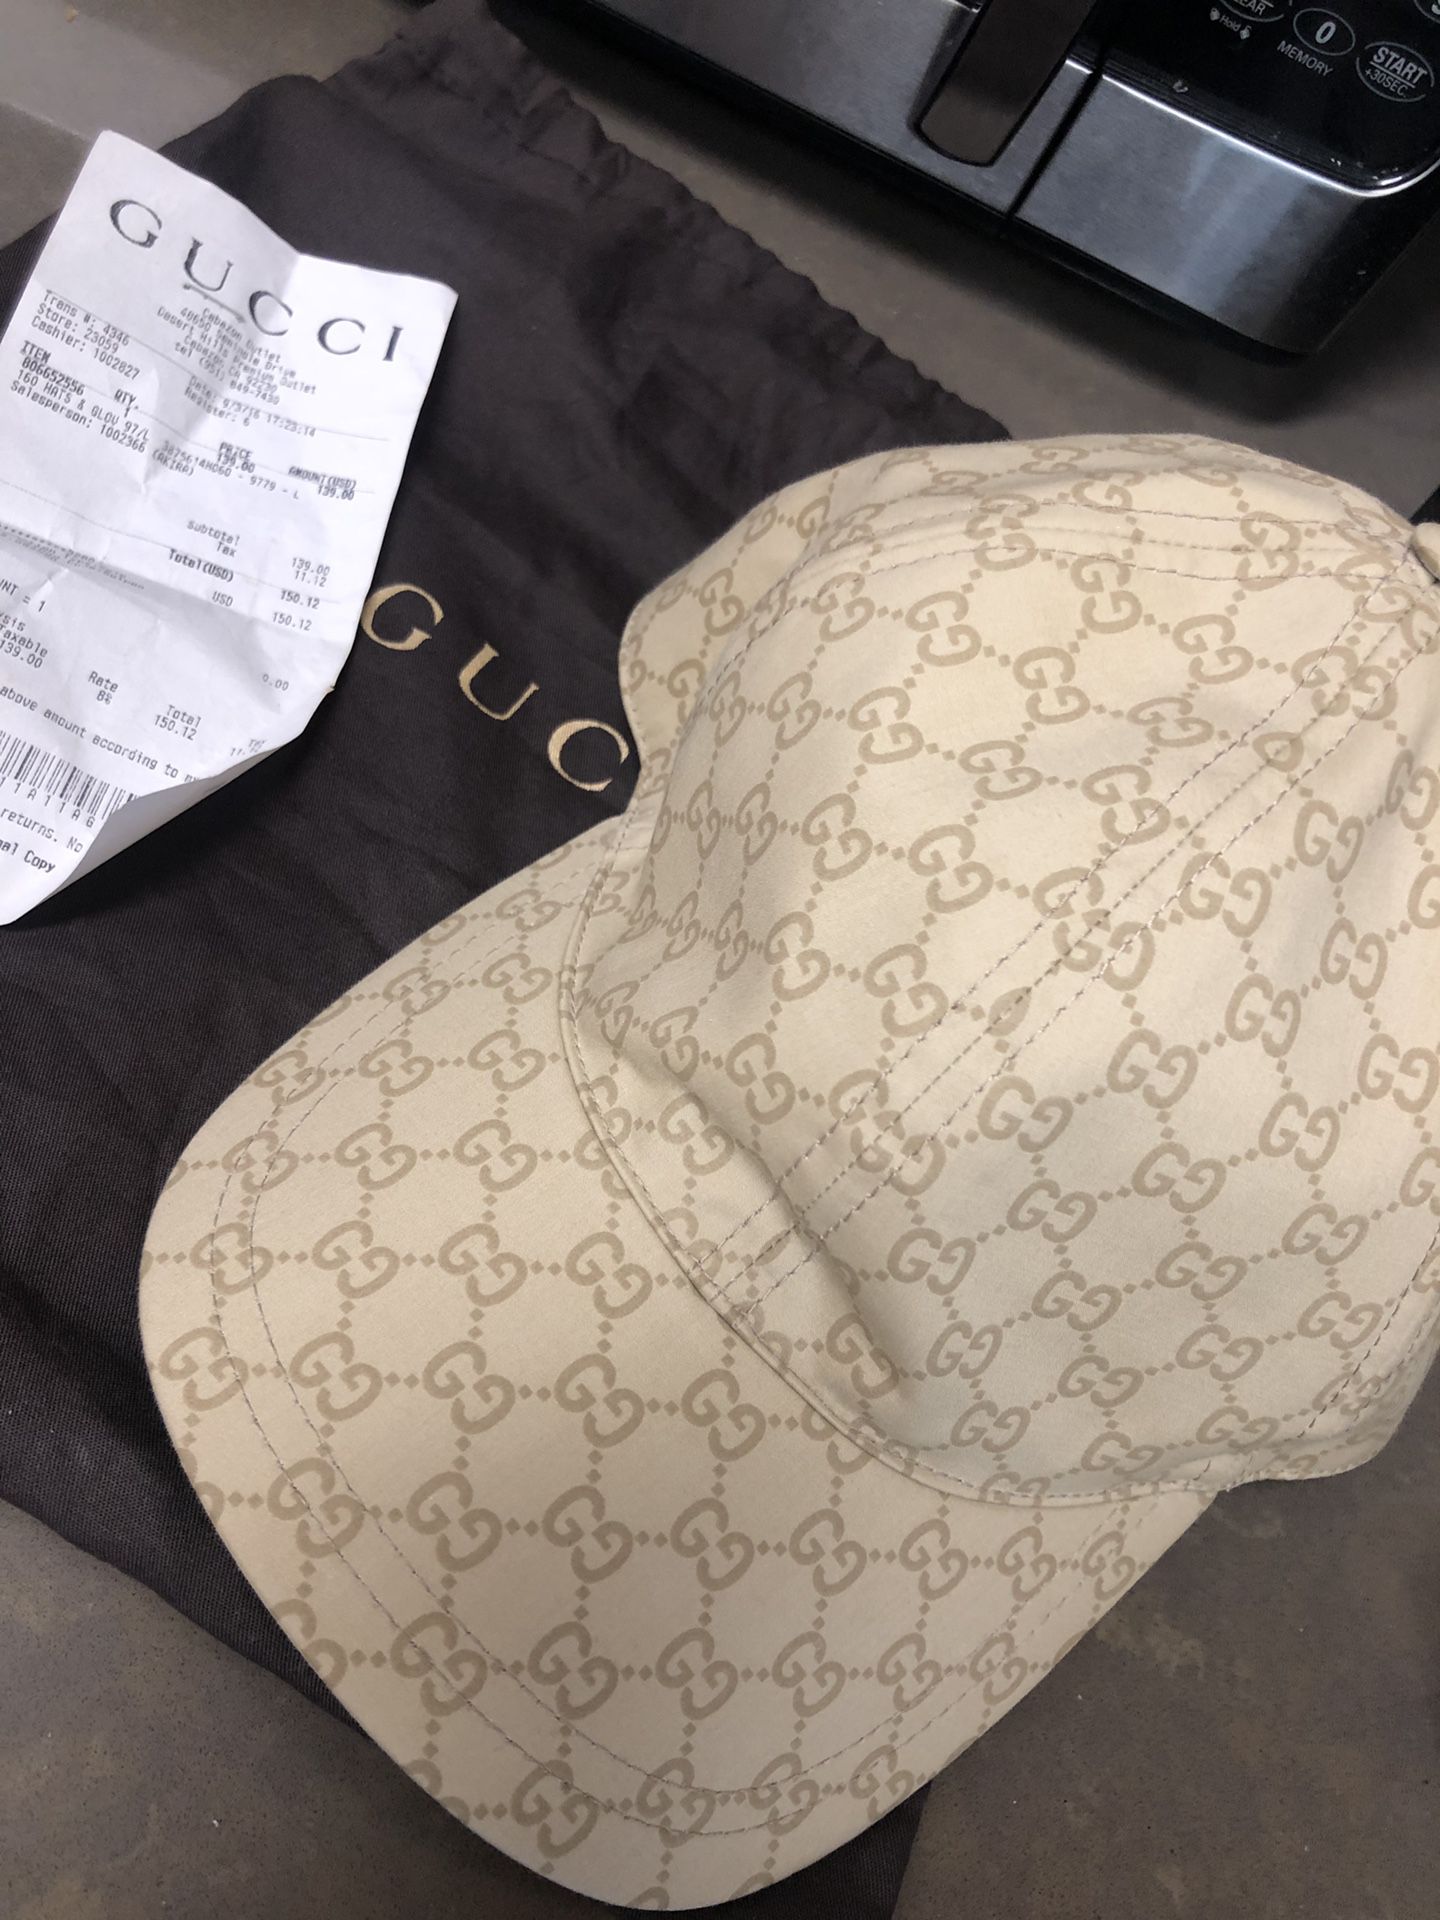 Gucci, Accessories, Gucci Baseball Cap Limited Edition 0 Years